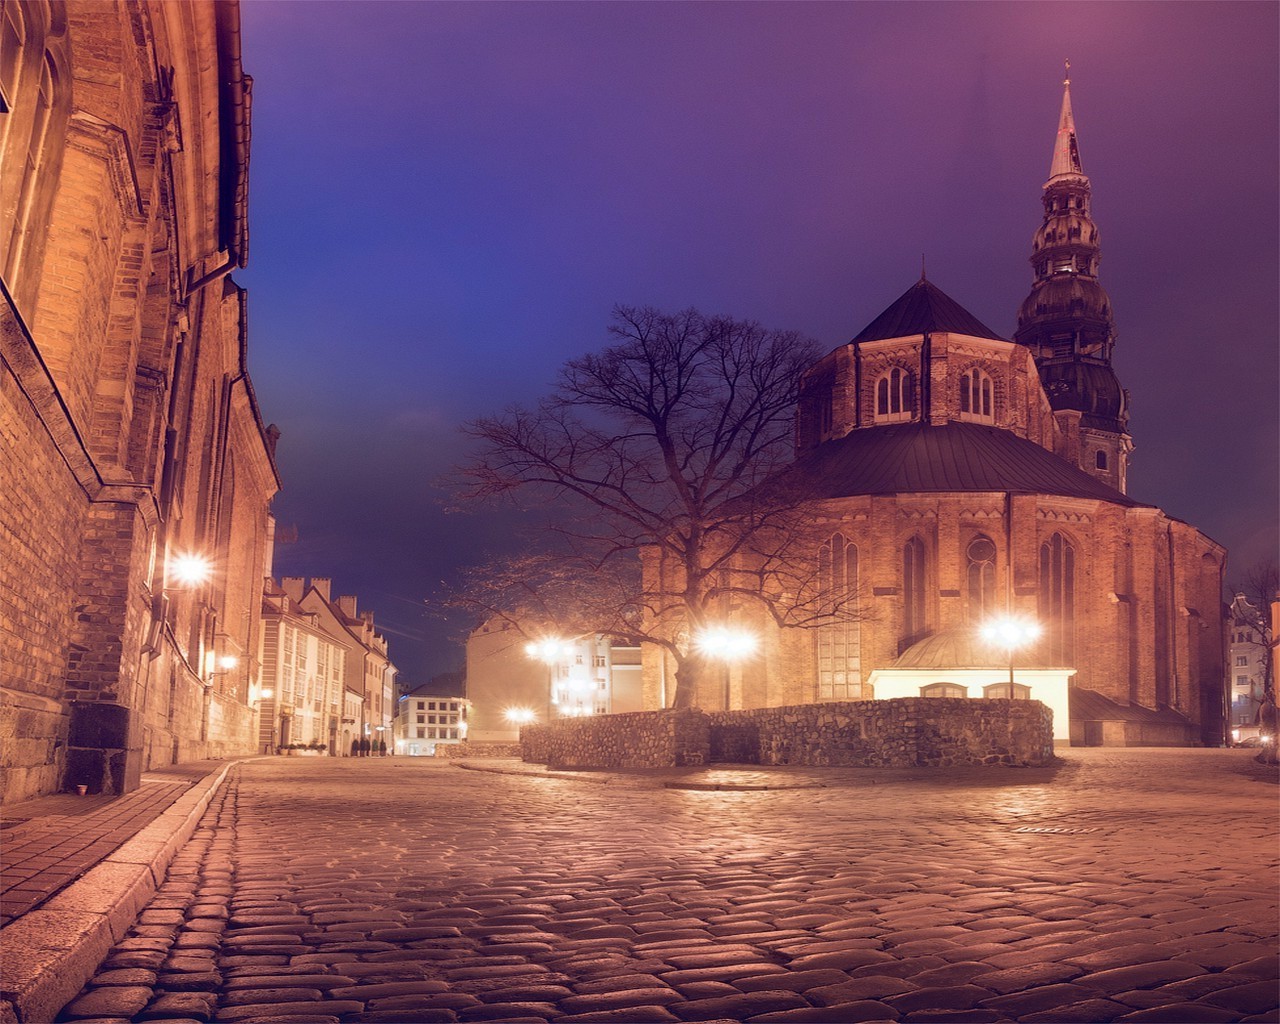 city and architecture architecture sunset dusk travel church evening illuminated dawn city cathedral outdoors sky old gothic bridge water light street religion